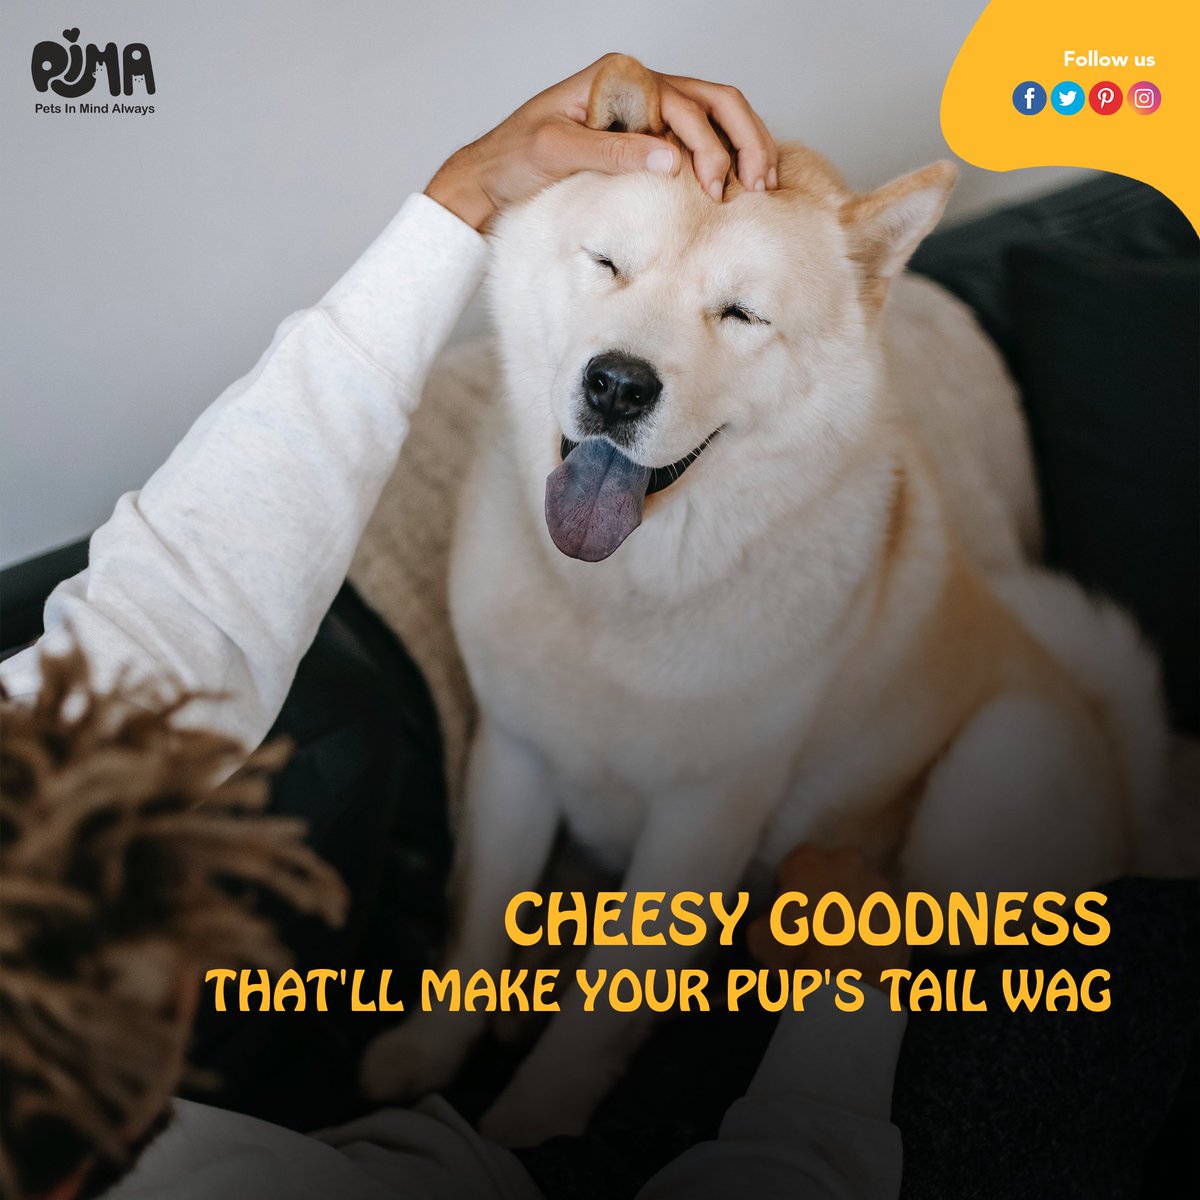 Watch your pup's tail wag with delight as they chow down on PiMA's cheesy canine chew 🐶🧀

#CheesyCanineChew #CheeseTreats #DogChews #CheeseLovers #HealthyDogs #NaturalChews #DogSnacks #ChewTime #CheeseObsession #CheesyDelights #DoggyTreats #CheeseAddict #YummyChews